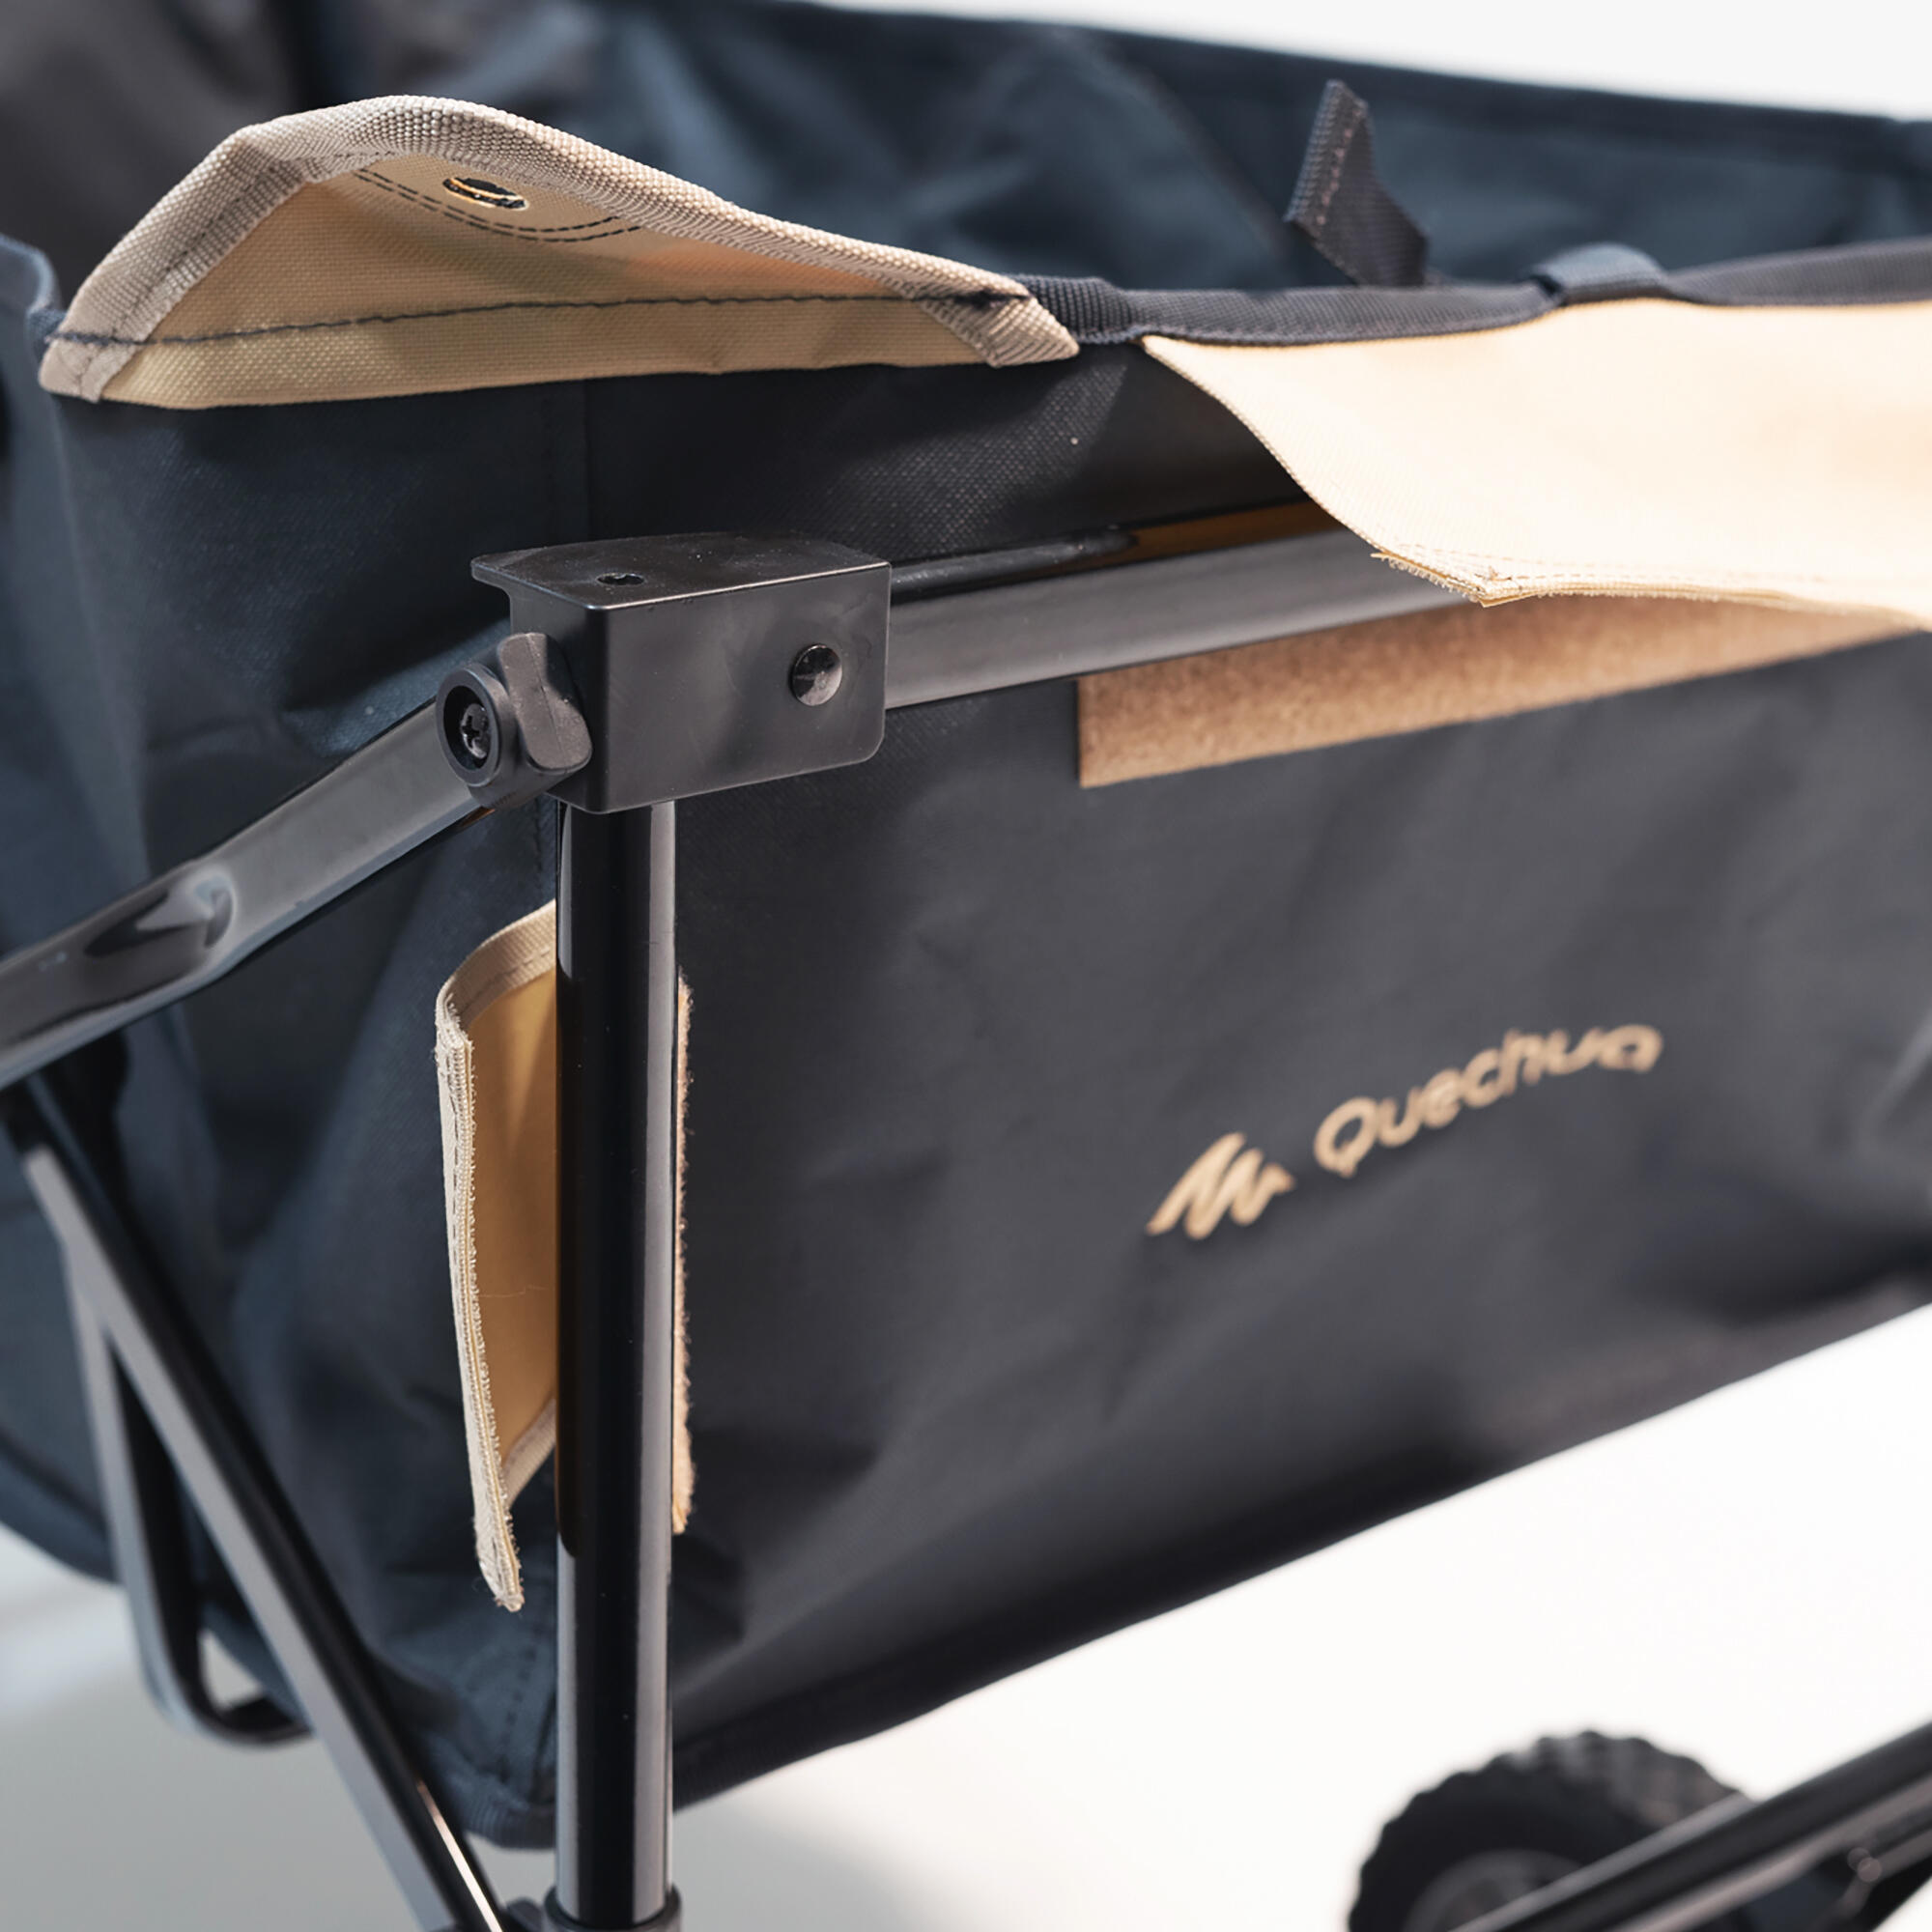 FOLDING TRANSPORT CART FOR CAMPING EQUIPMENT - TROLLEY 7/10